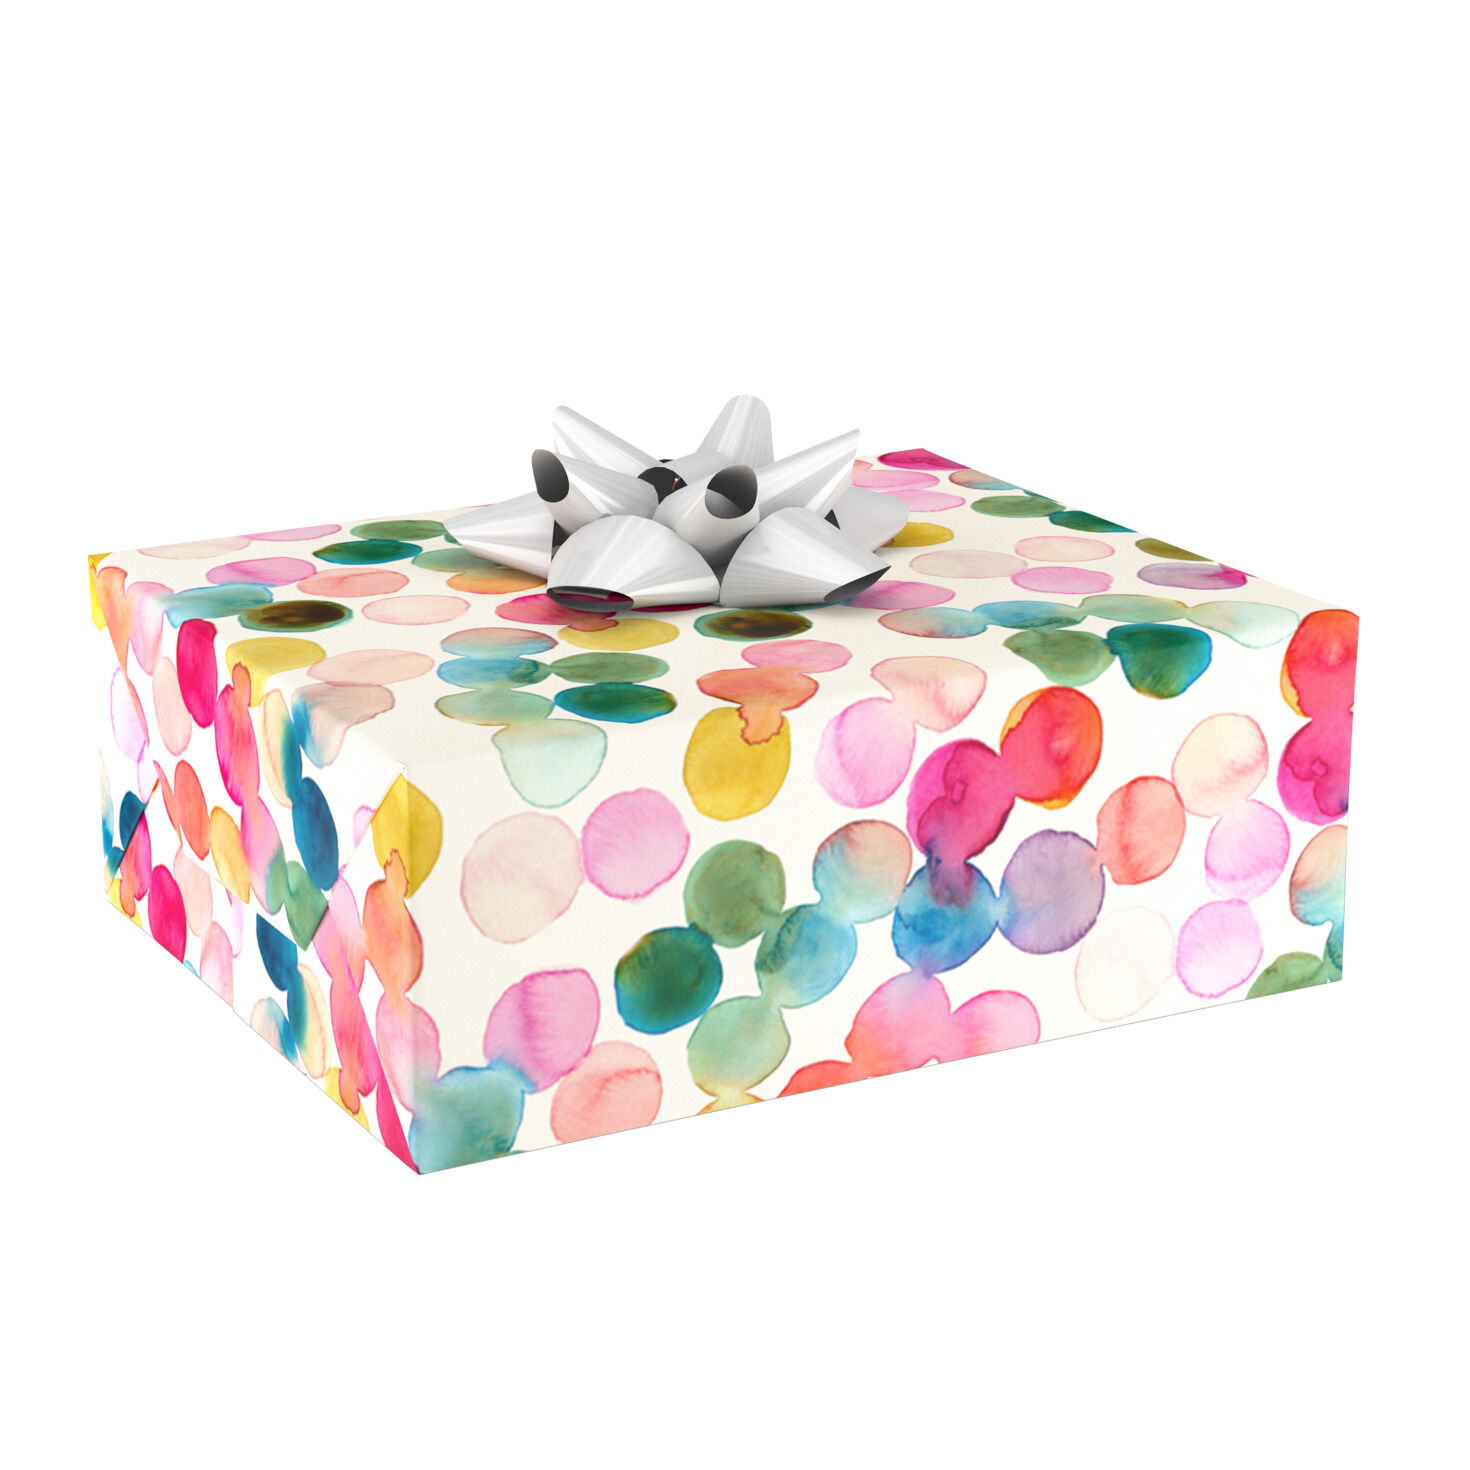 Female Gift Wrapping Paper Choose From 10 Female Designs 2 SHEETS FOR £1.79 